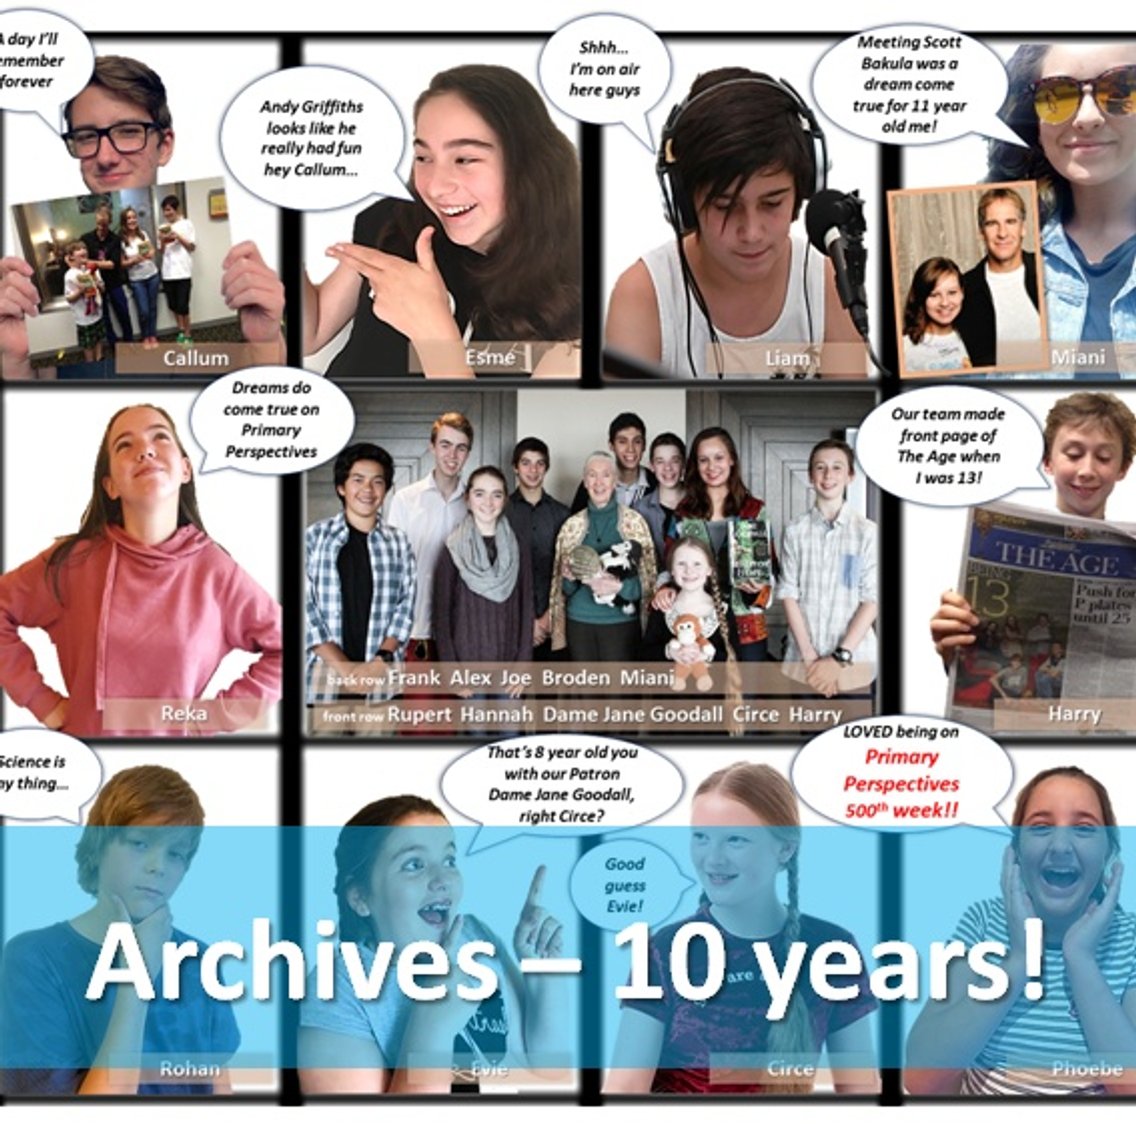 Archives - THE LAST 10 YEARS! - Cover Image